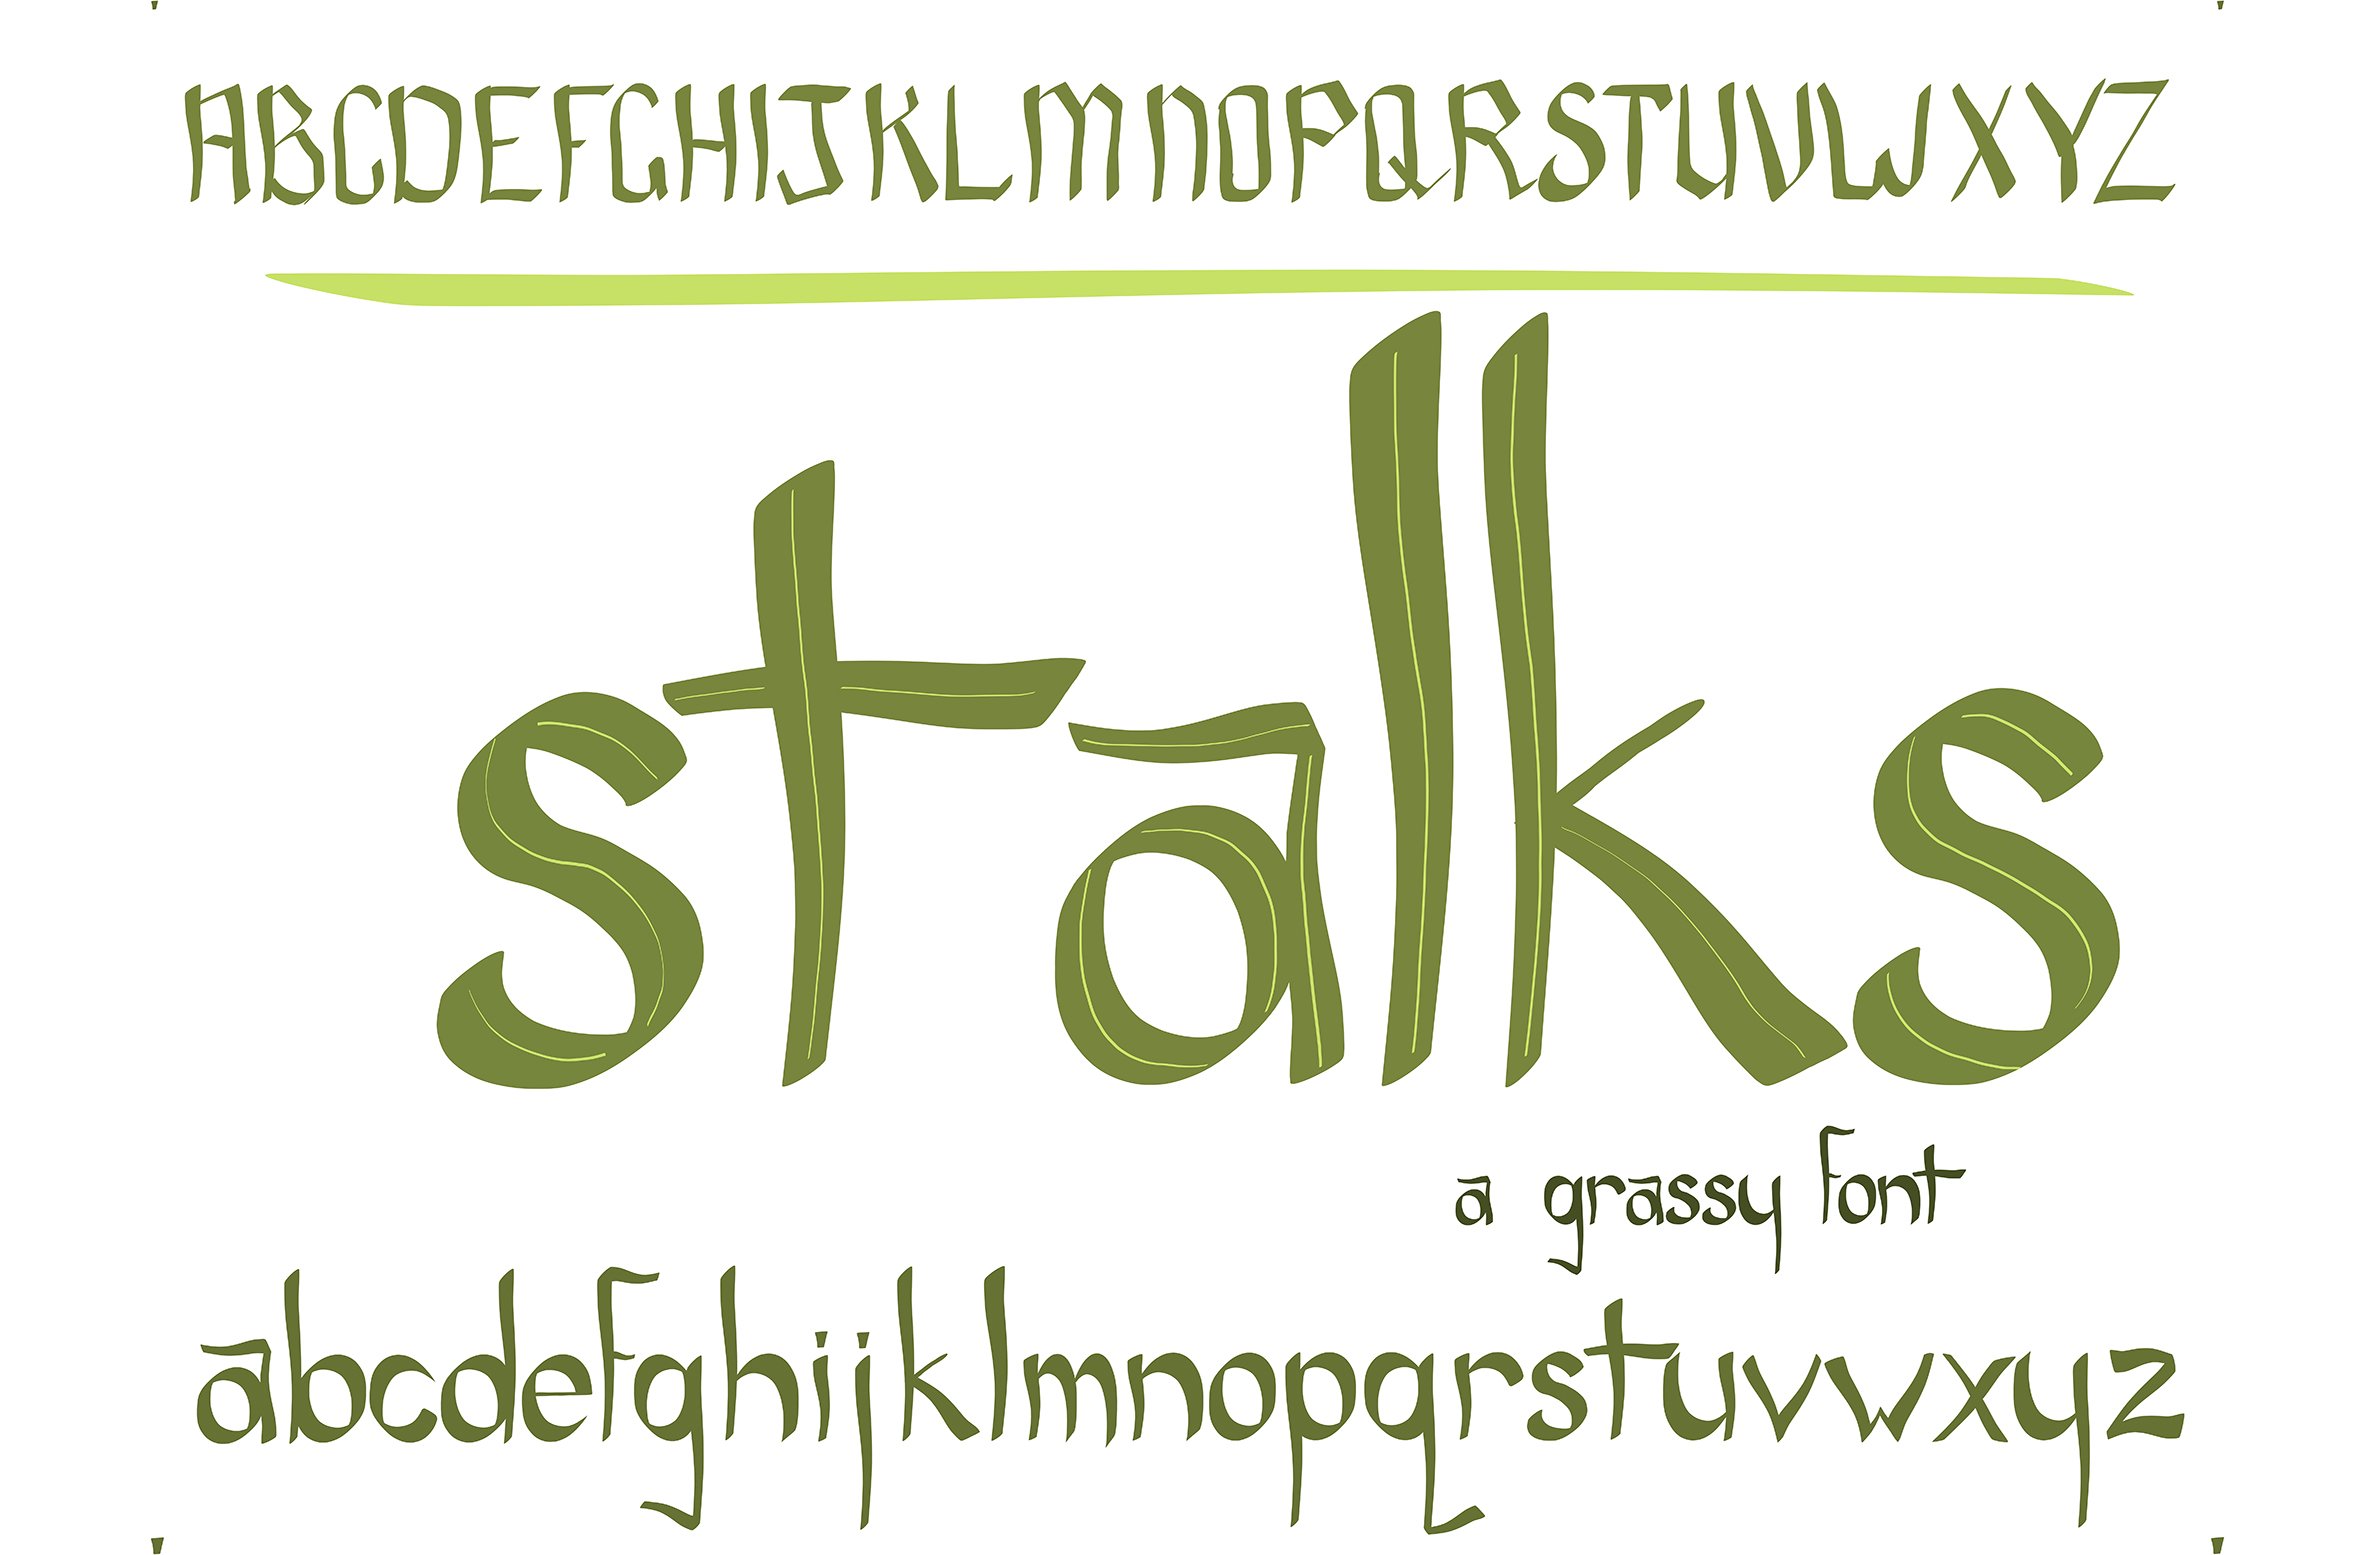 Font Stalks Blades of Grass Creative cover image.